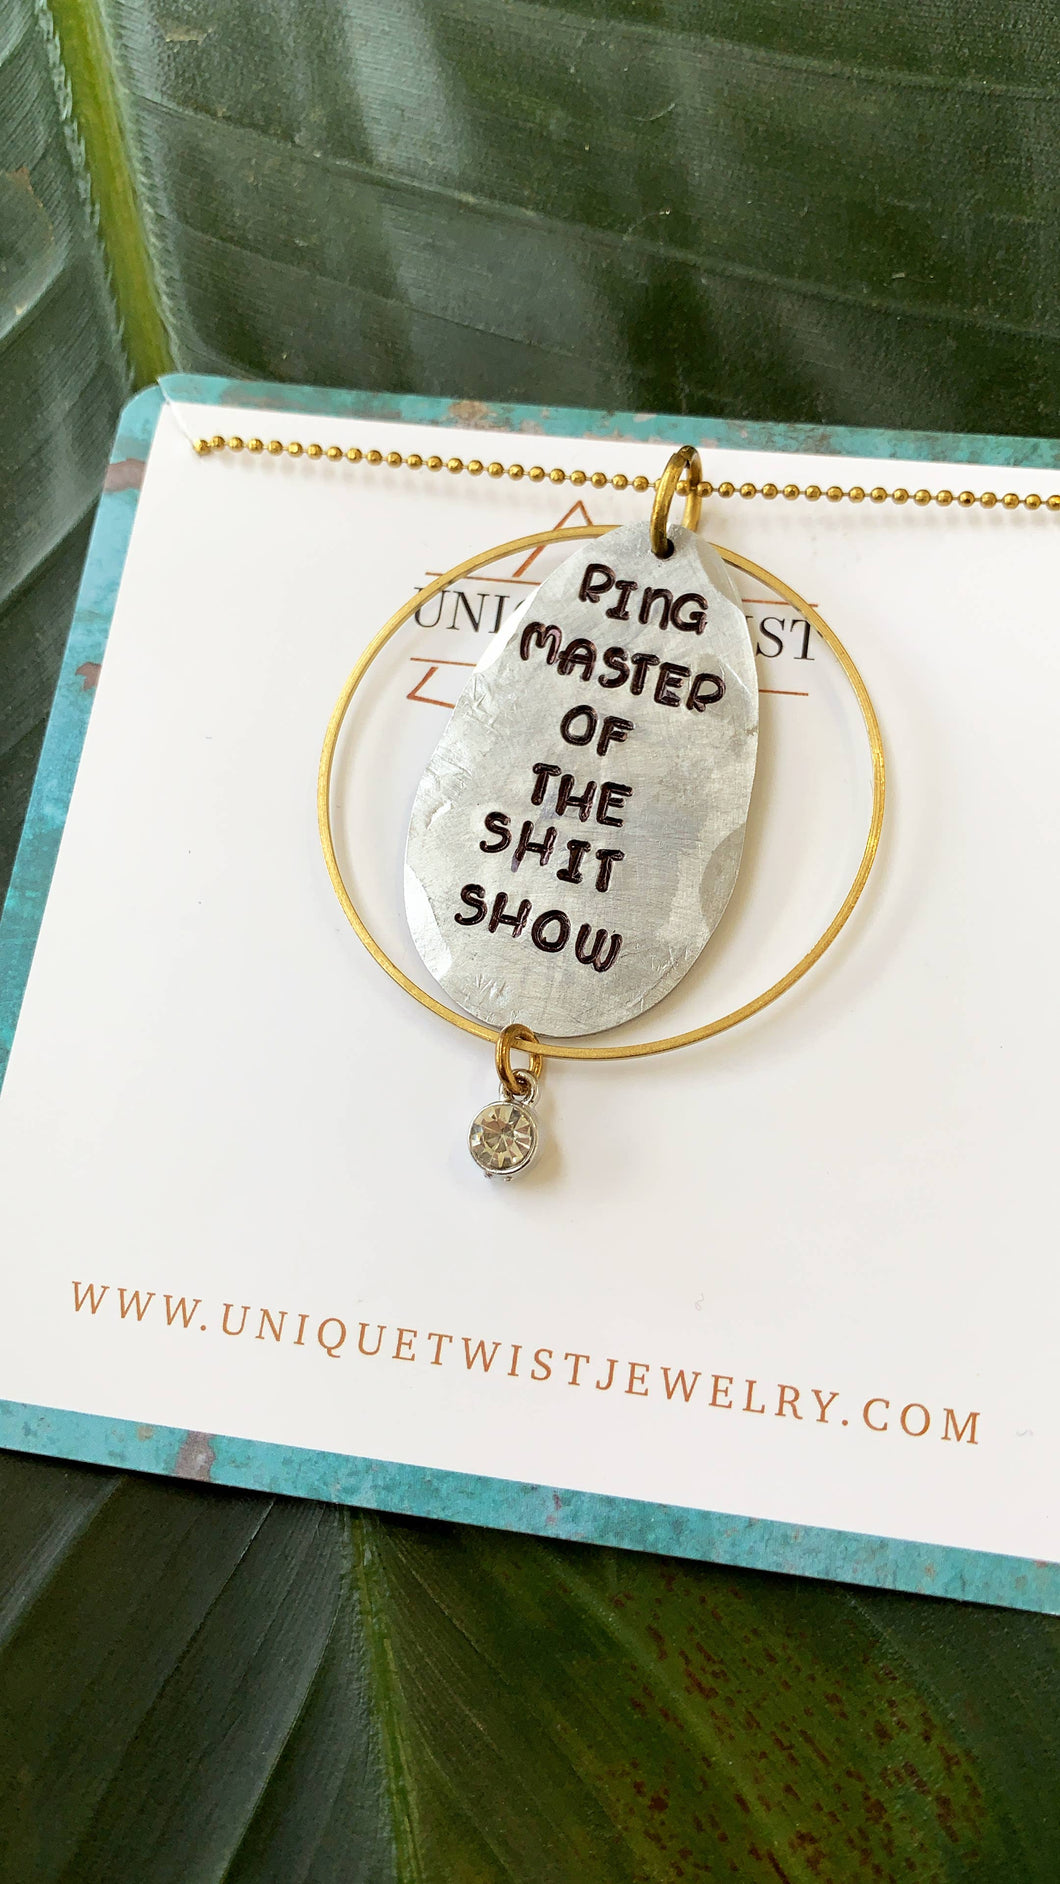 Unique Twist Jewelry - Ringmaster of the Shitshow Necklace